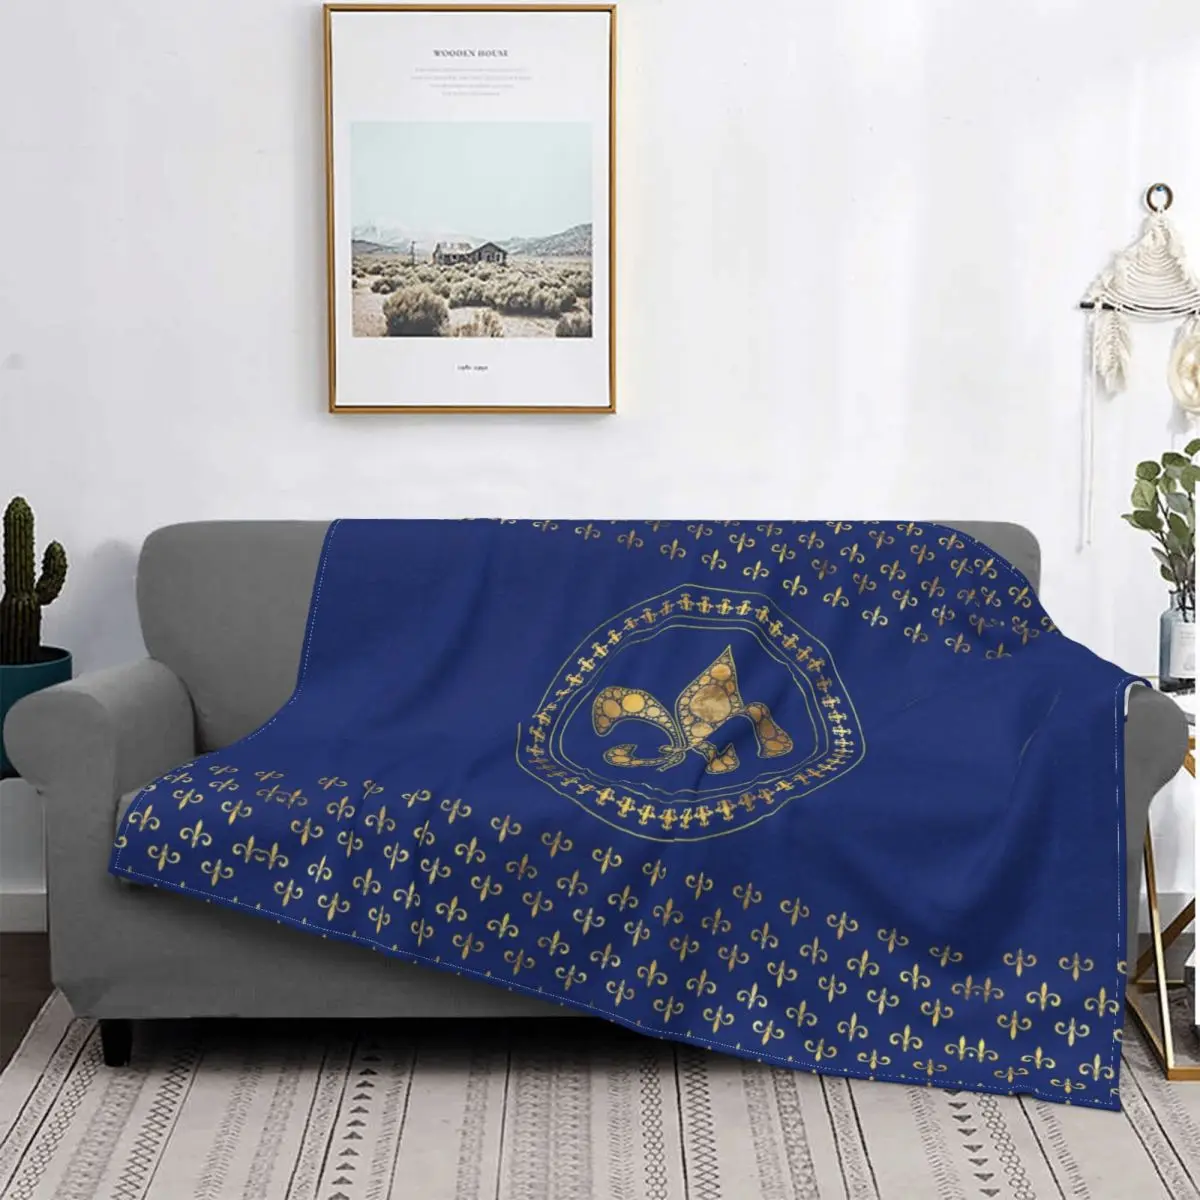 

Luxury Black And Gold Fleur De Lys Blankets Soft Flannel Floral Fleur-de-Lis Throw Blanket for Couch Outdoor Bedding Sprint Lily